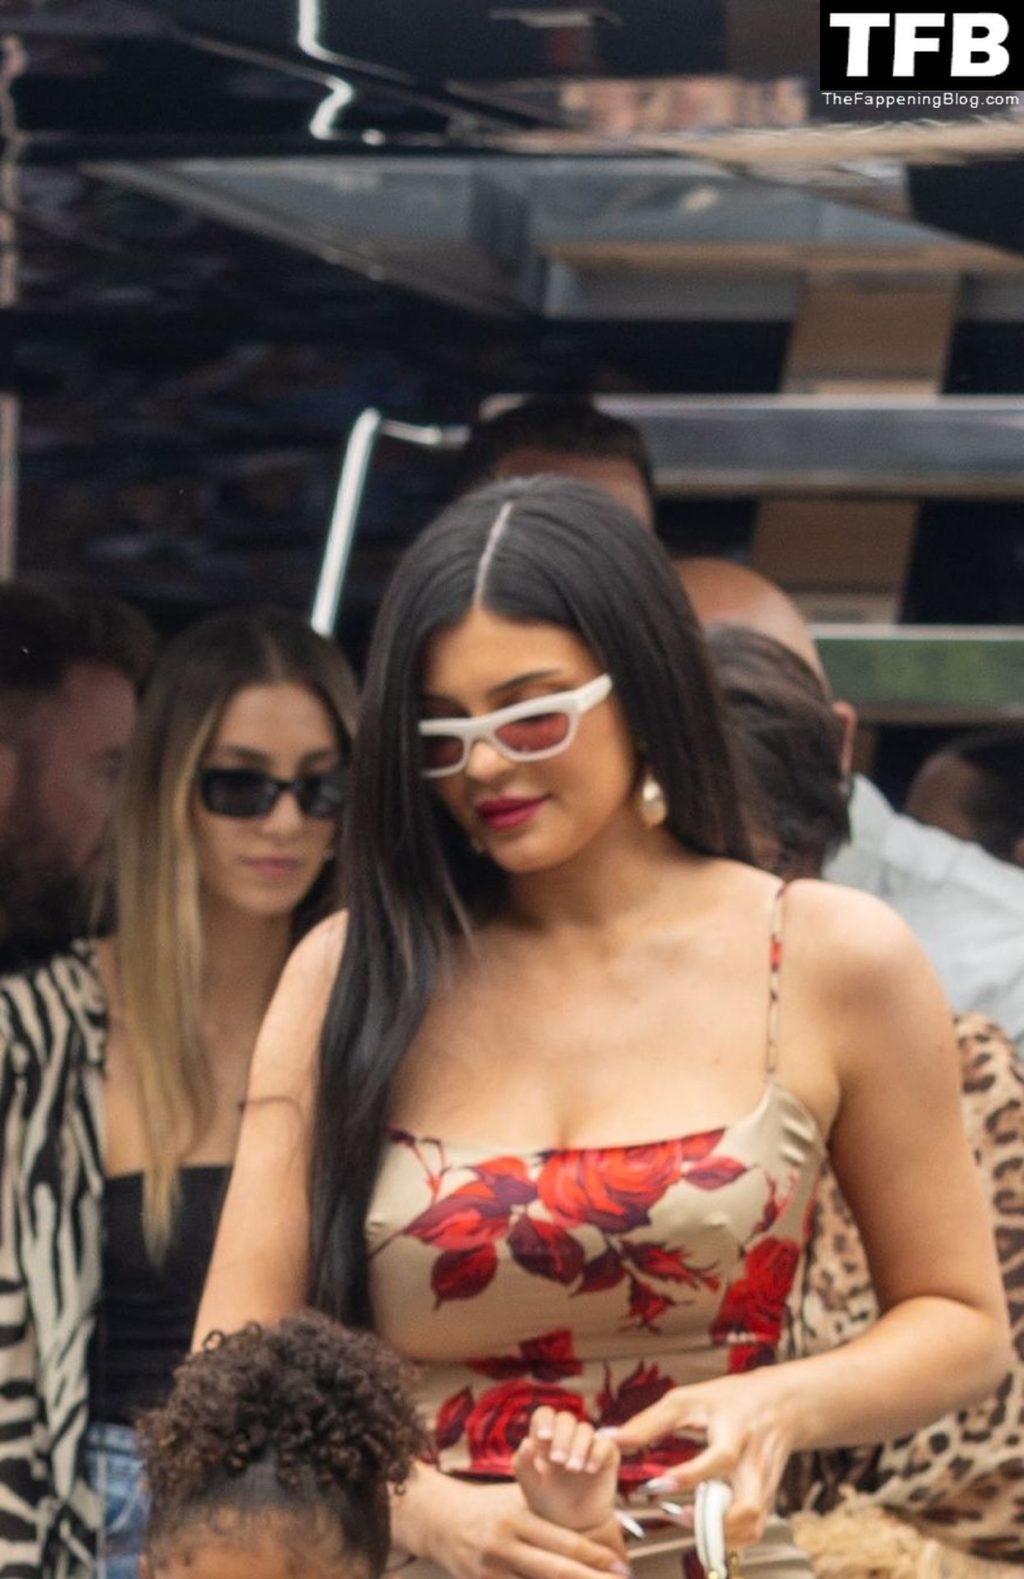 Kylie Jenner Sexy The Fappening Blog 28 1024x1579 - Kylie Jenner Flaunts Her Curves in Portofino (32 Photos)